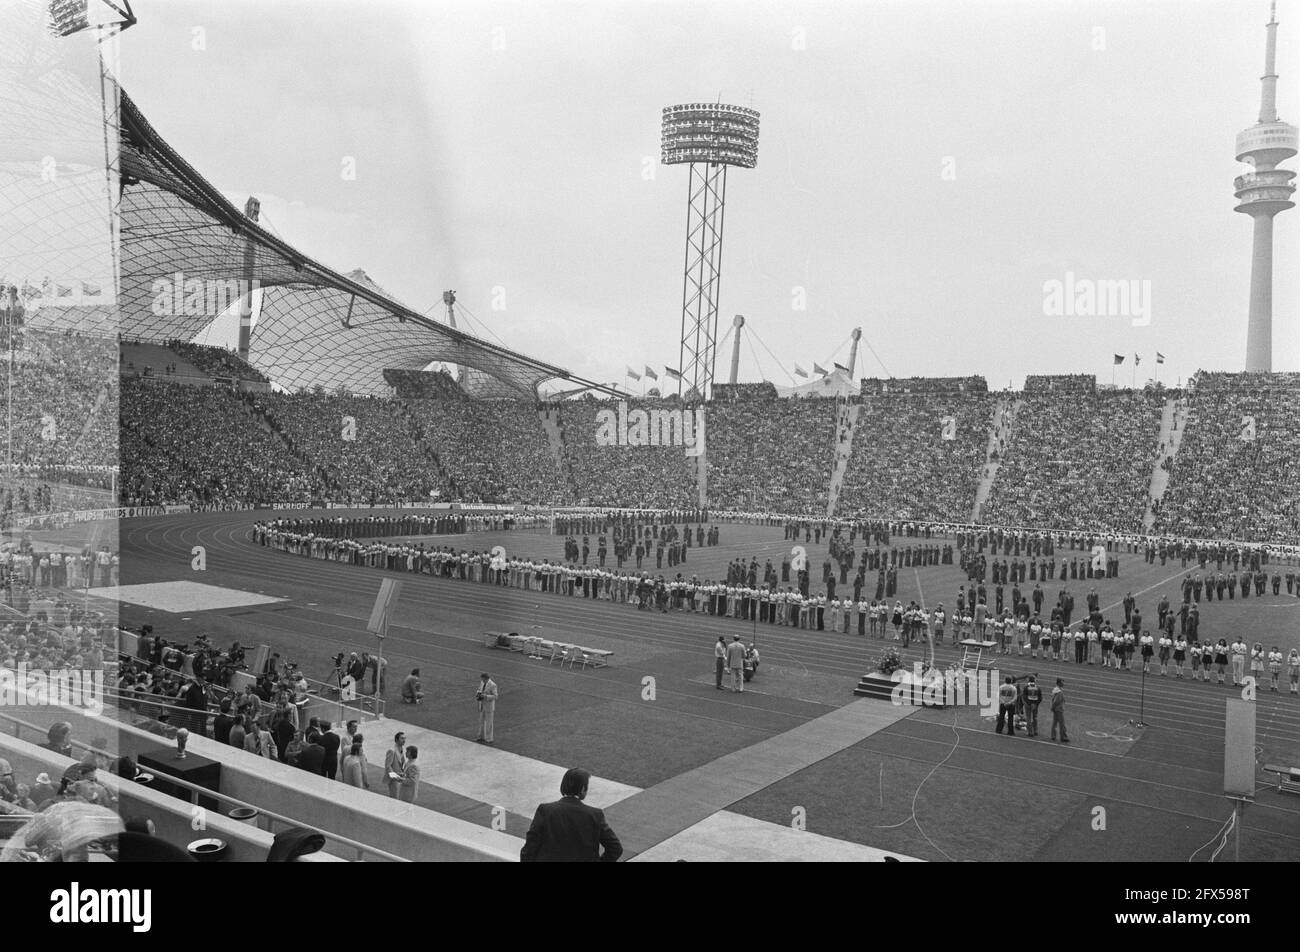 World Cup final 1974 in Munich, West Germany v Netherlands 2-1; closing ceremony, July 7, 1974, finals, sports, soccer, world championships, The Netherlands, 20th century press agency photo, news to remember, documentary, historic photography 1945-1990, visual stories, human history of the Twentieth Century, capturing moments in time Stock Photo